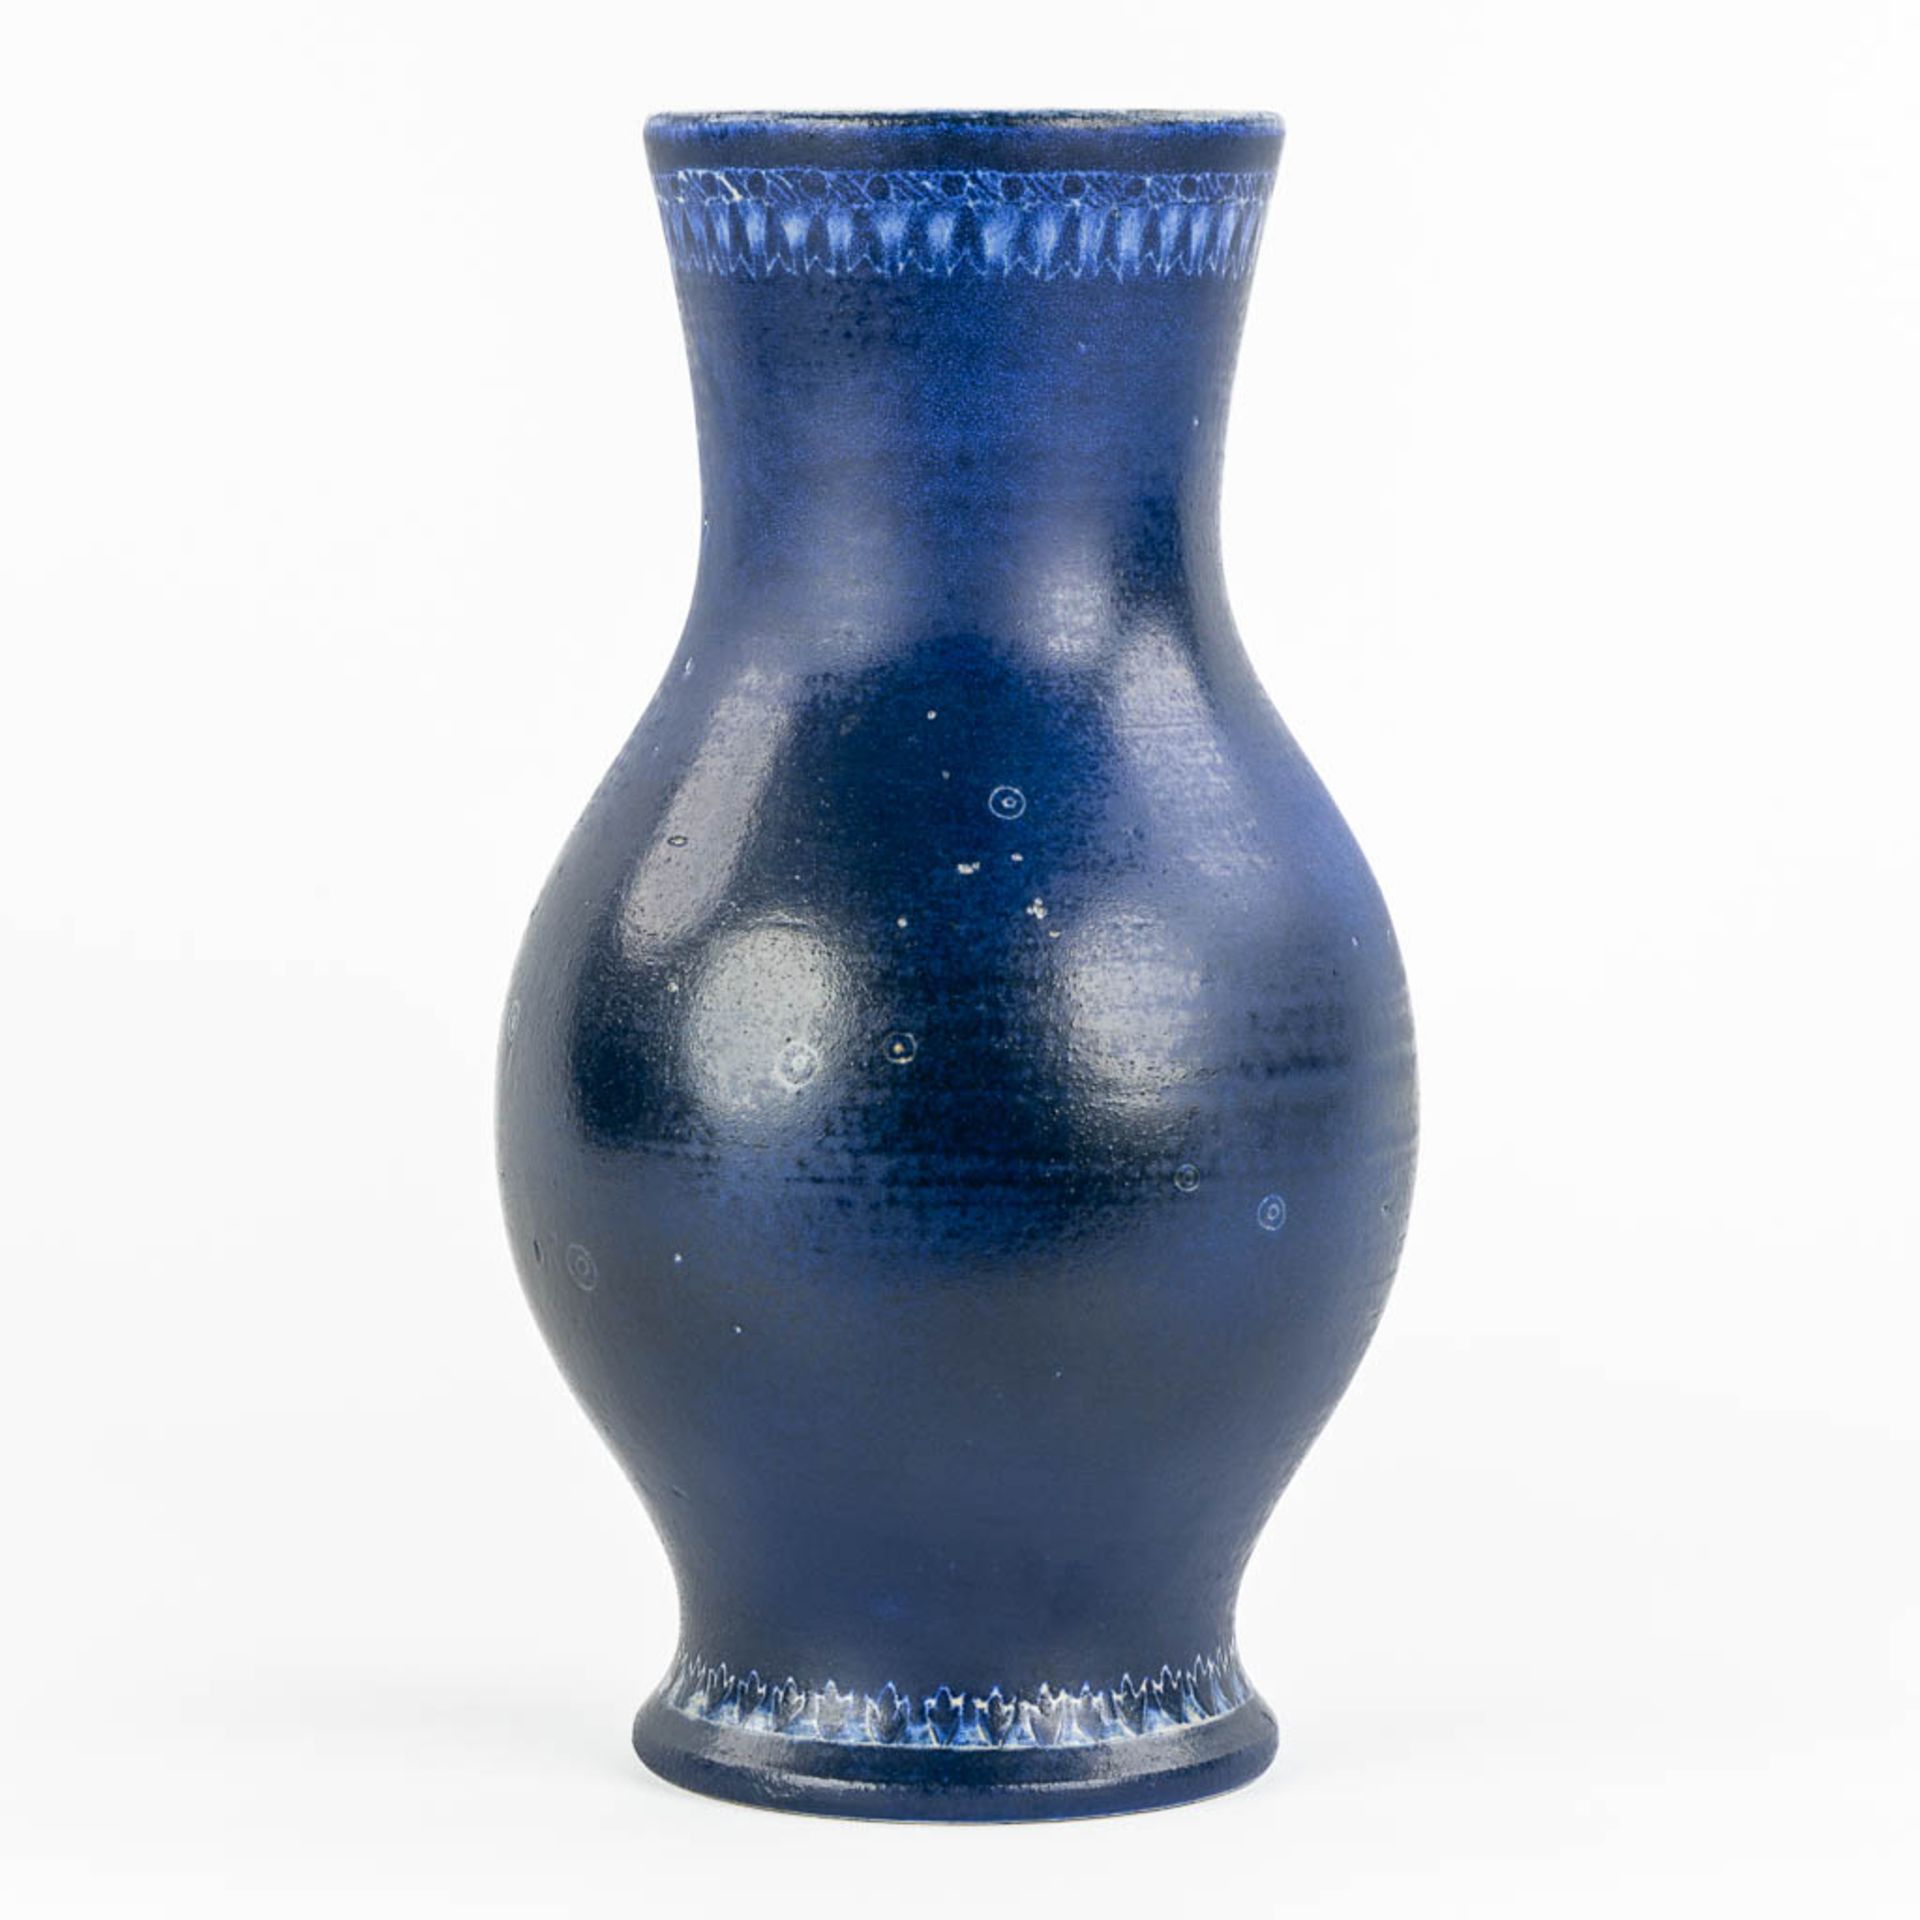 A vase with blue glaze, glazed ceramics for Perignem. From the early periods. (H:31,5 x D:18 cm)